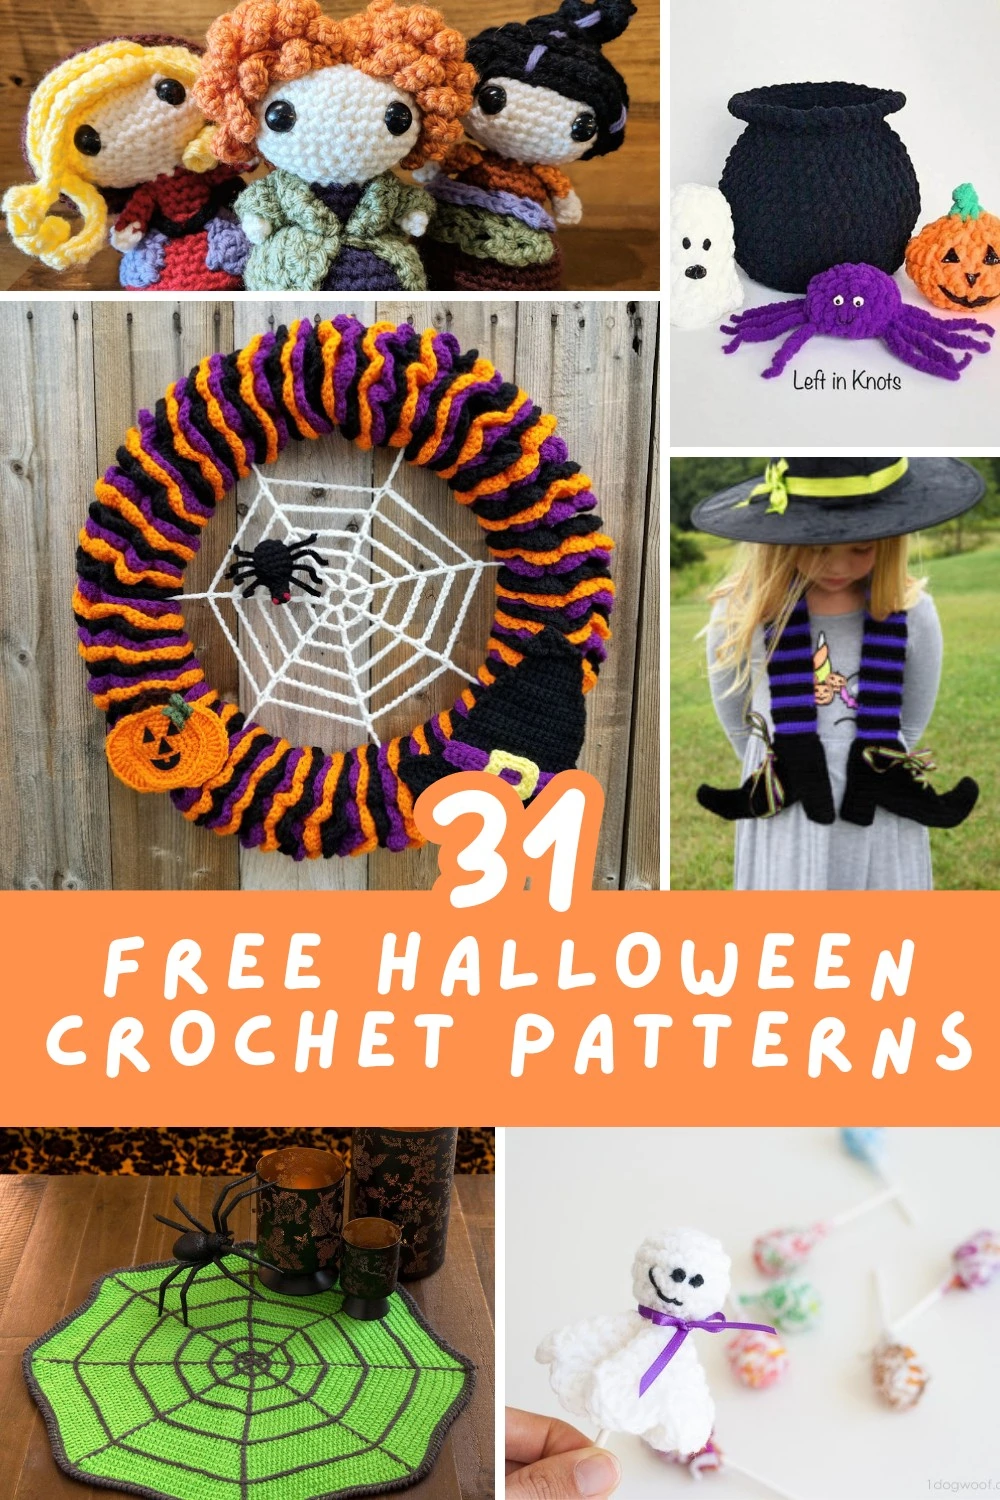 Celebrate Halloween with 31 free crochet patterns! Make cute Frankenstein ragdolls, bat toys, spooky wreaths, warm blankets, treat bags and more!. These fun and easy patterns are perfect for adding a handmade touch to your Halloween festivities. 🎃🦇 #FreeCrochetPatterns #HalloweenCrafts